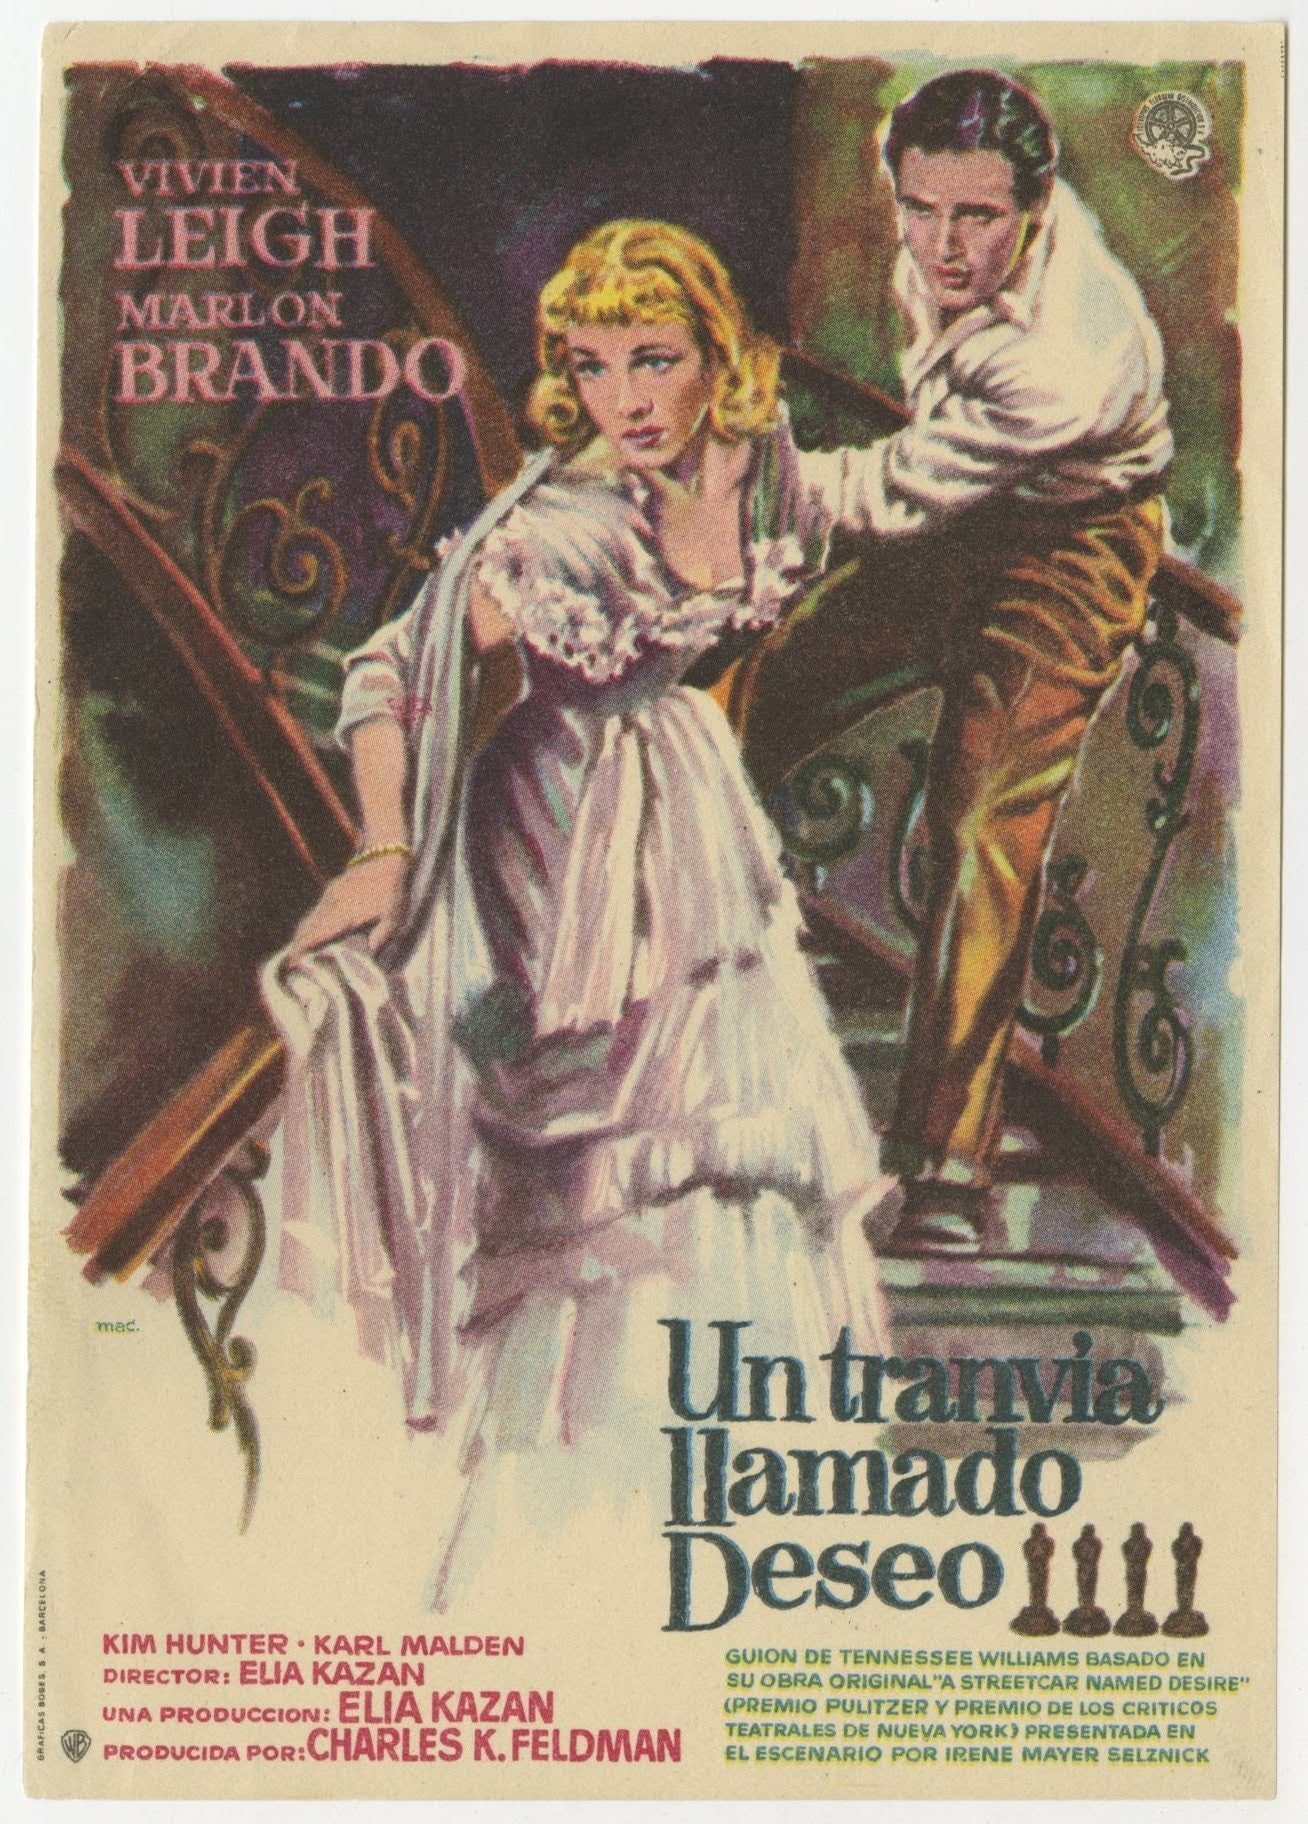 A Streetcar Named Desire Spanish Herald (R 1956) - posterpalace.com